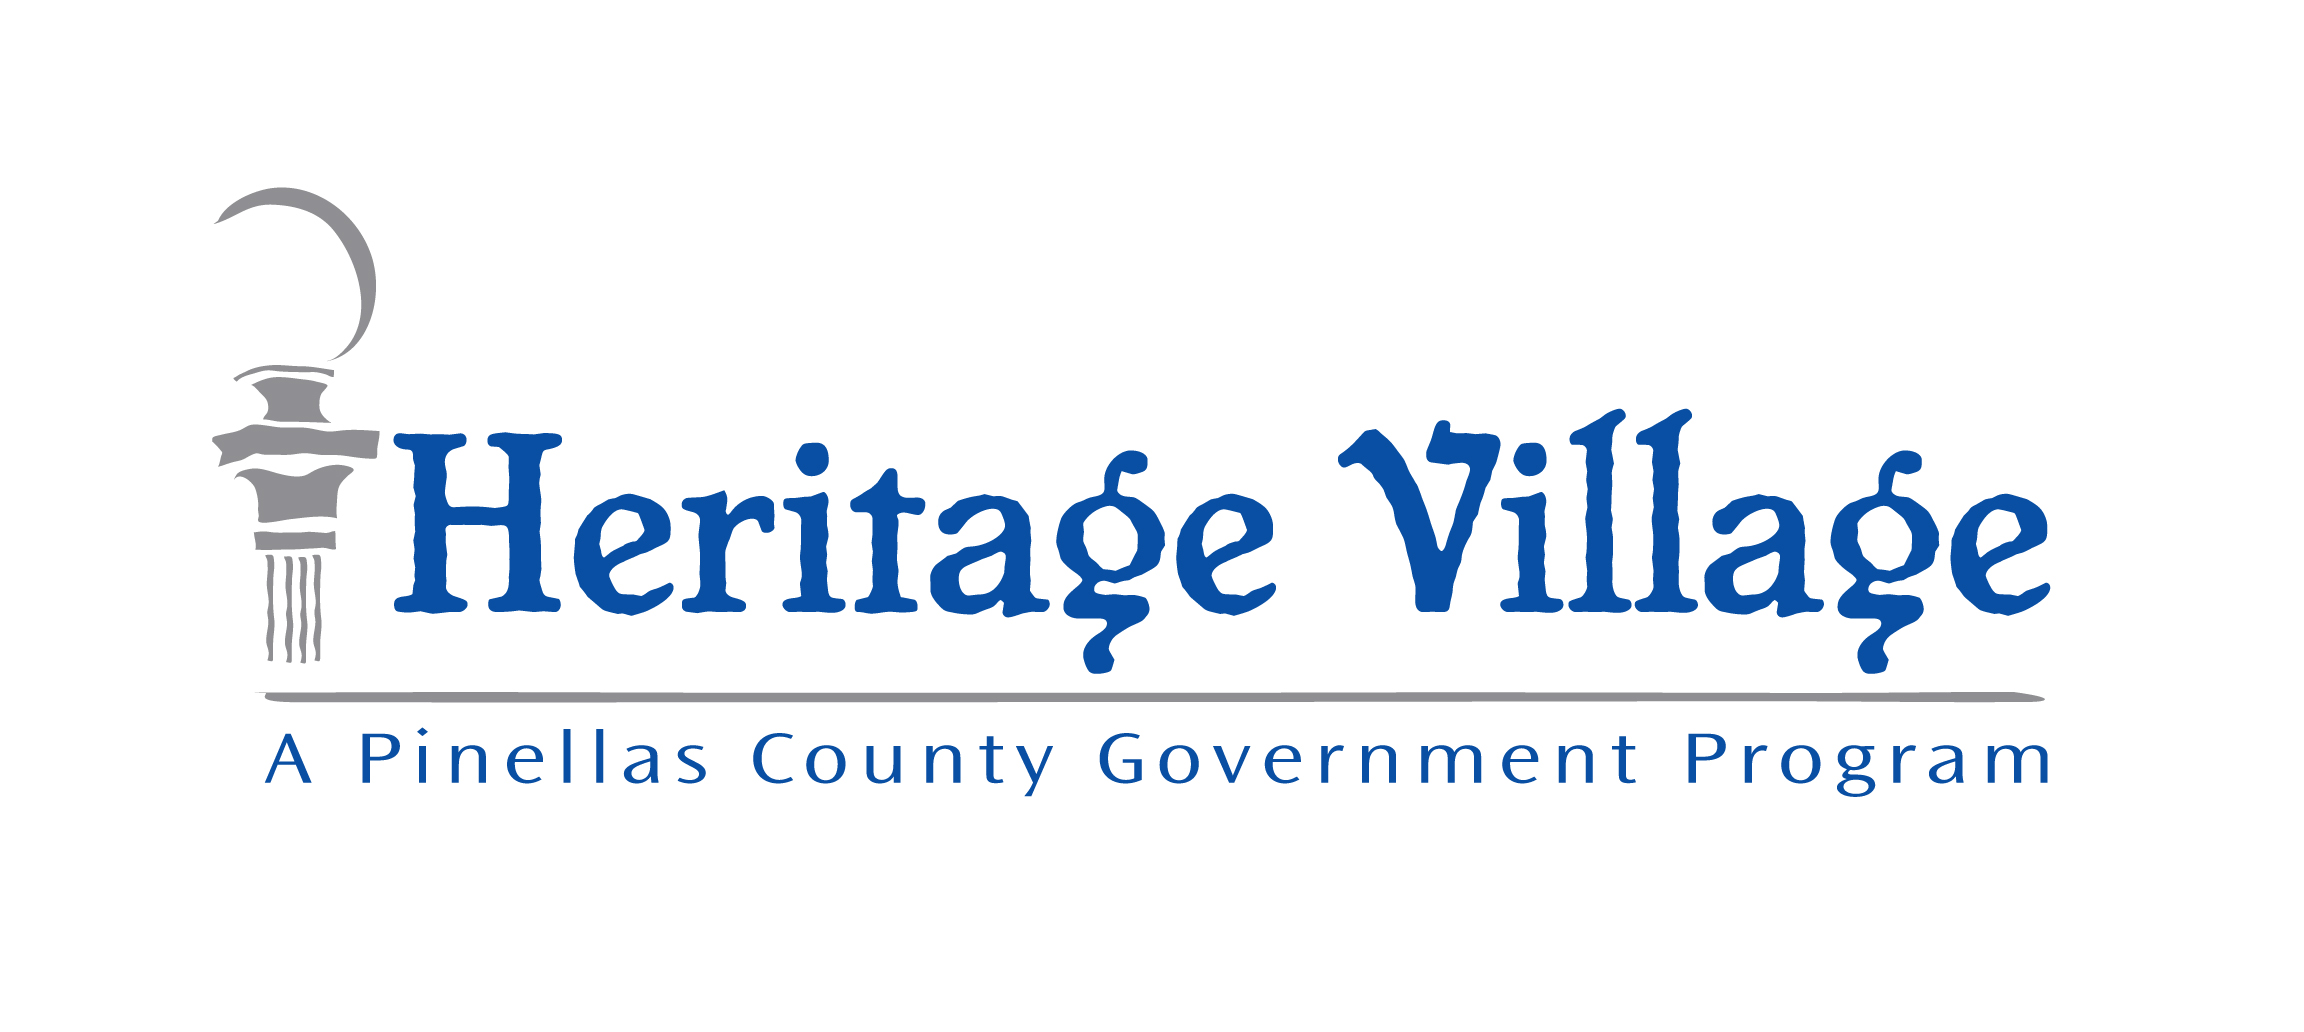 Heritage Village - A Pinellas County Government program